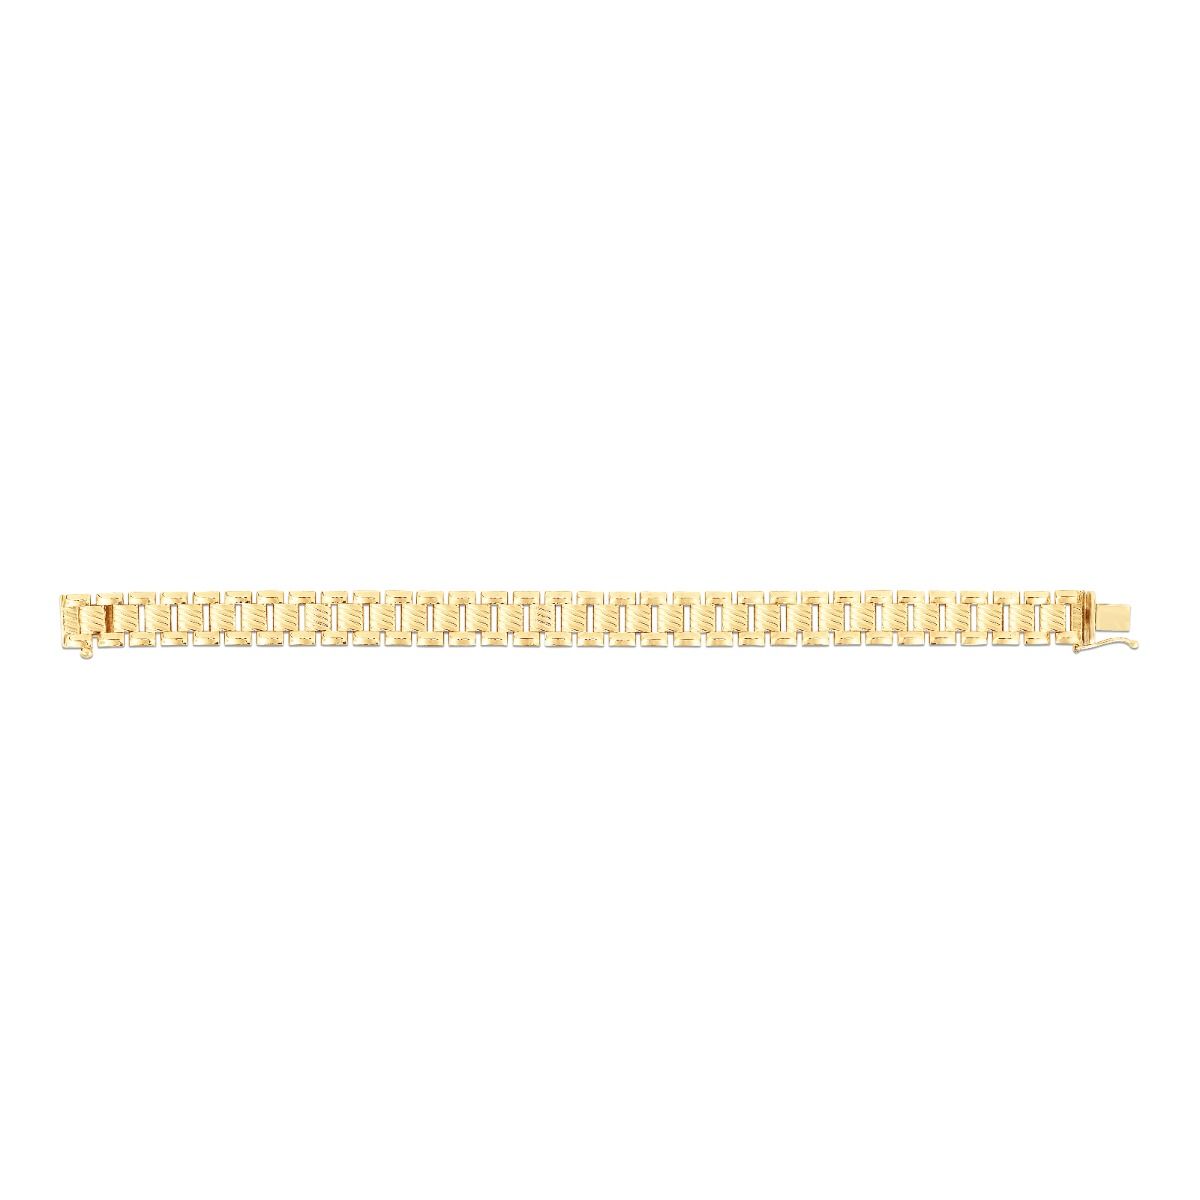 14K Two Tone Gold Rail Road Link Bracelet 95 Inches 149mm 924 Grams  68014 quality jewelry at TRAXNYC  buy online best price in NYC